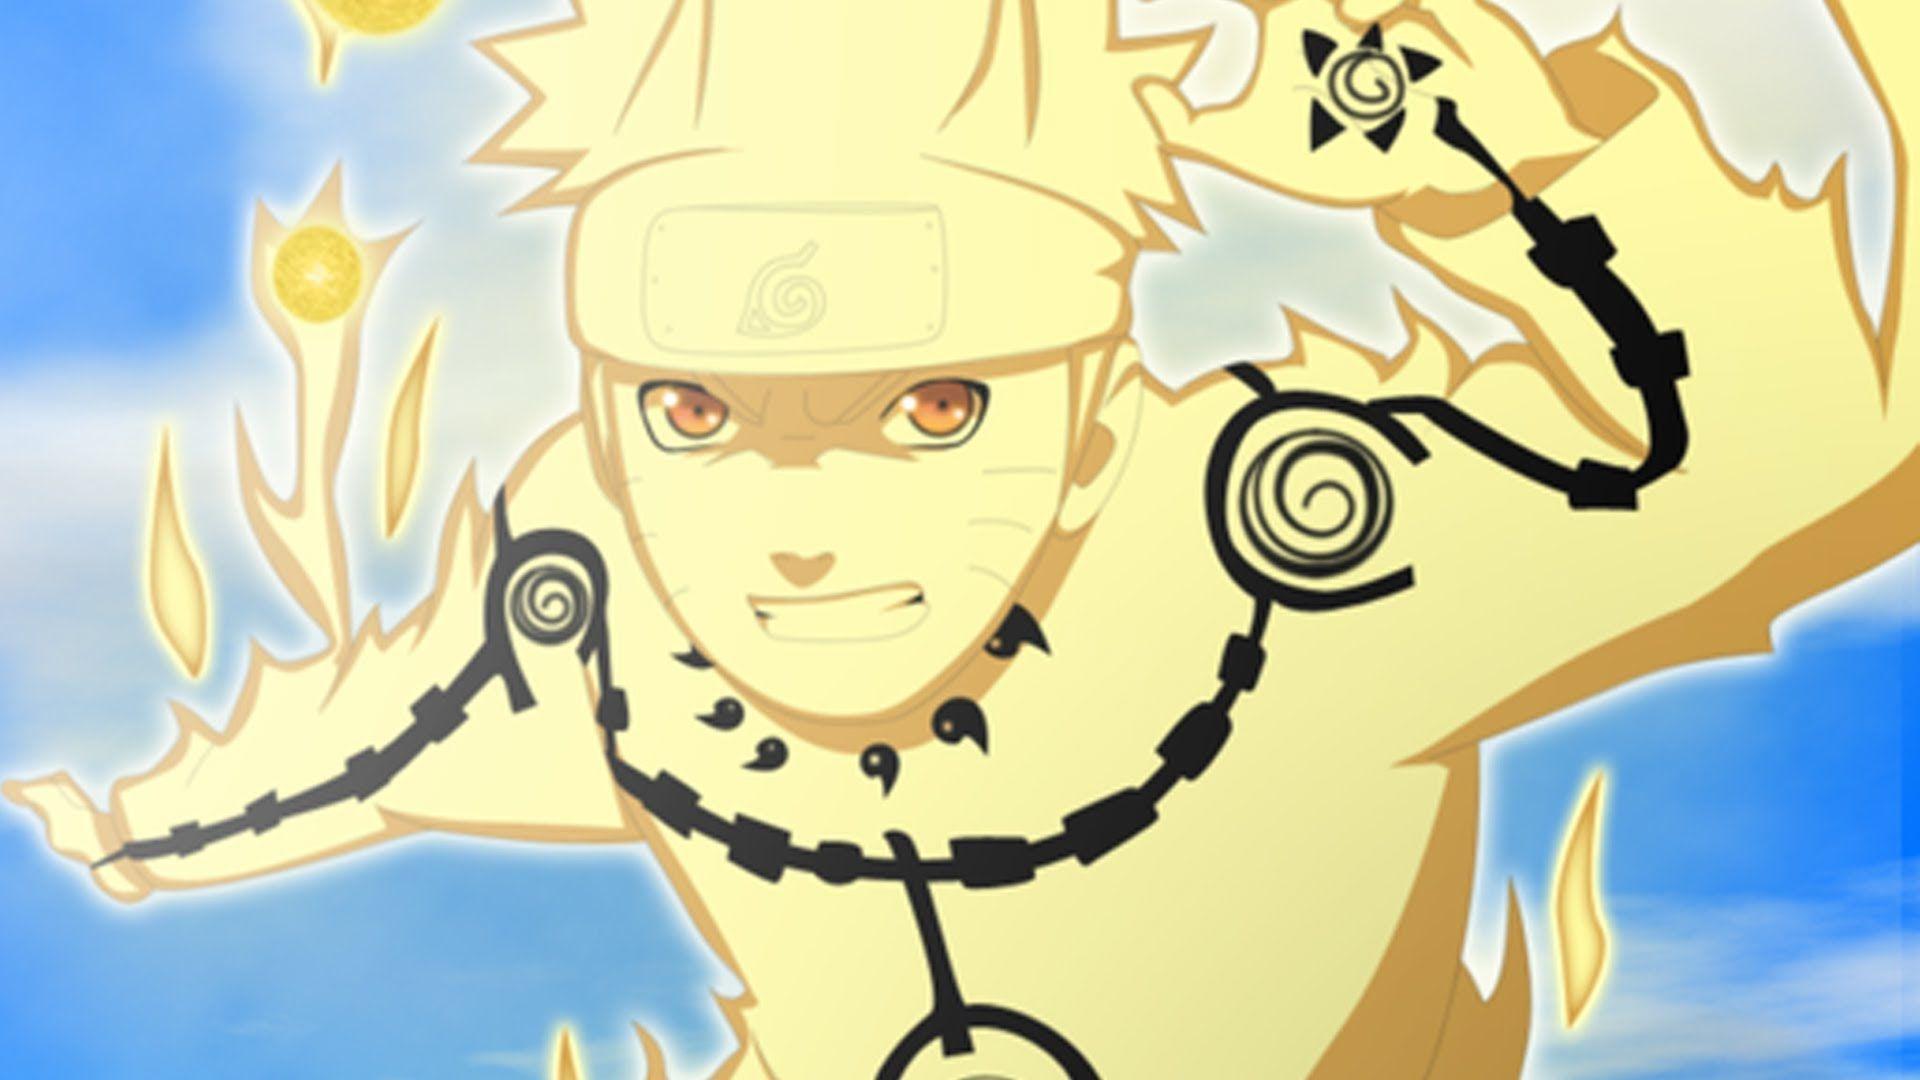 Is Naruto Weak Without The Nine Tails Kyuubi Chakra or Kyuubi Mode